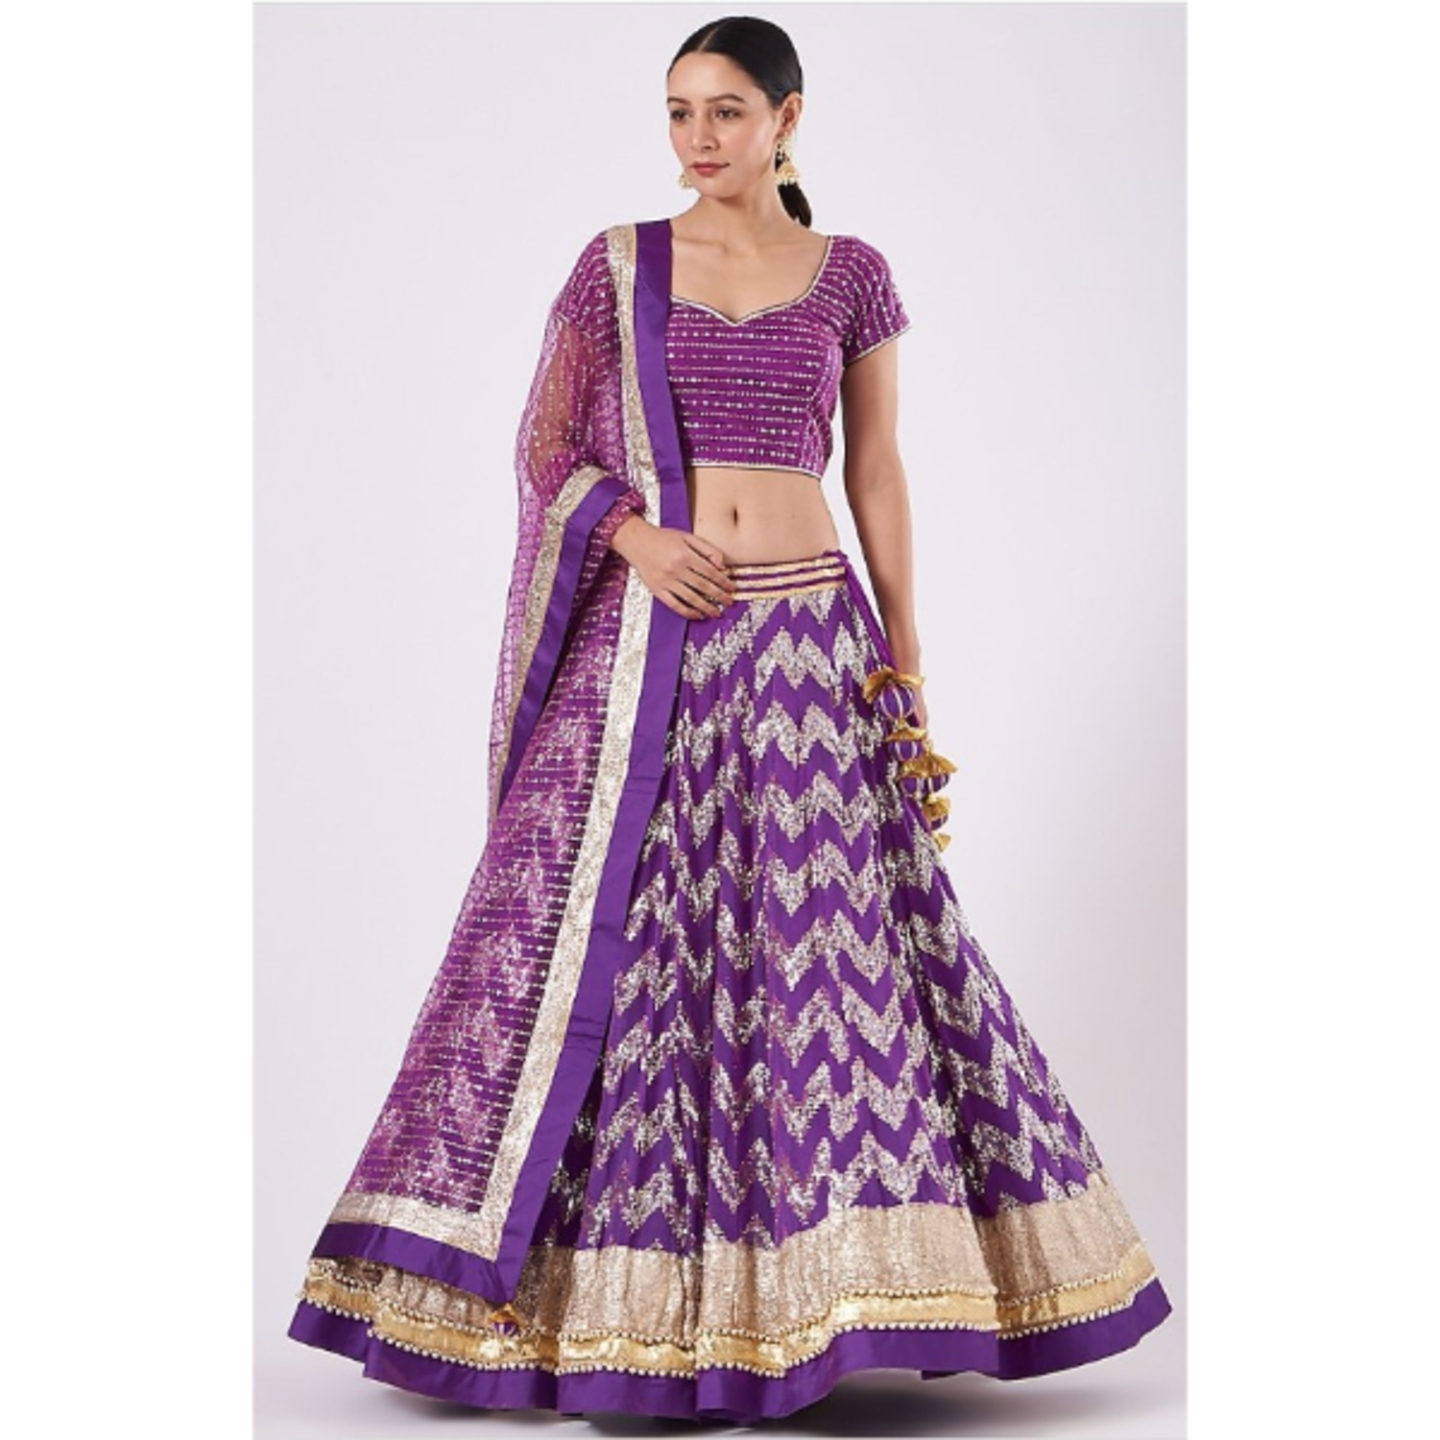 KIM MAGICAL MAUVE Georgette Lehenga set in gold and silver chevron embroidery.